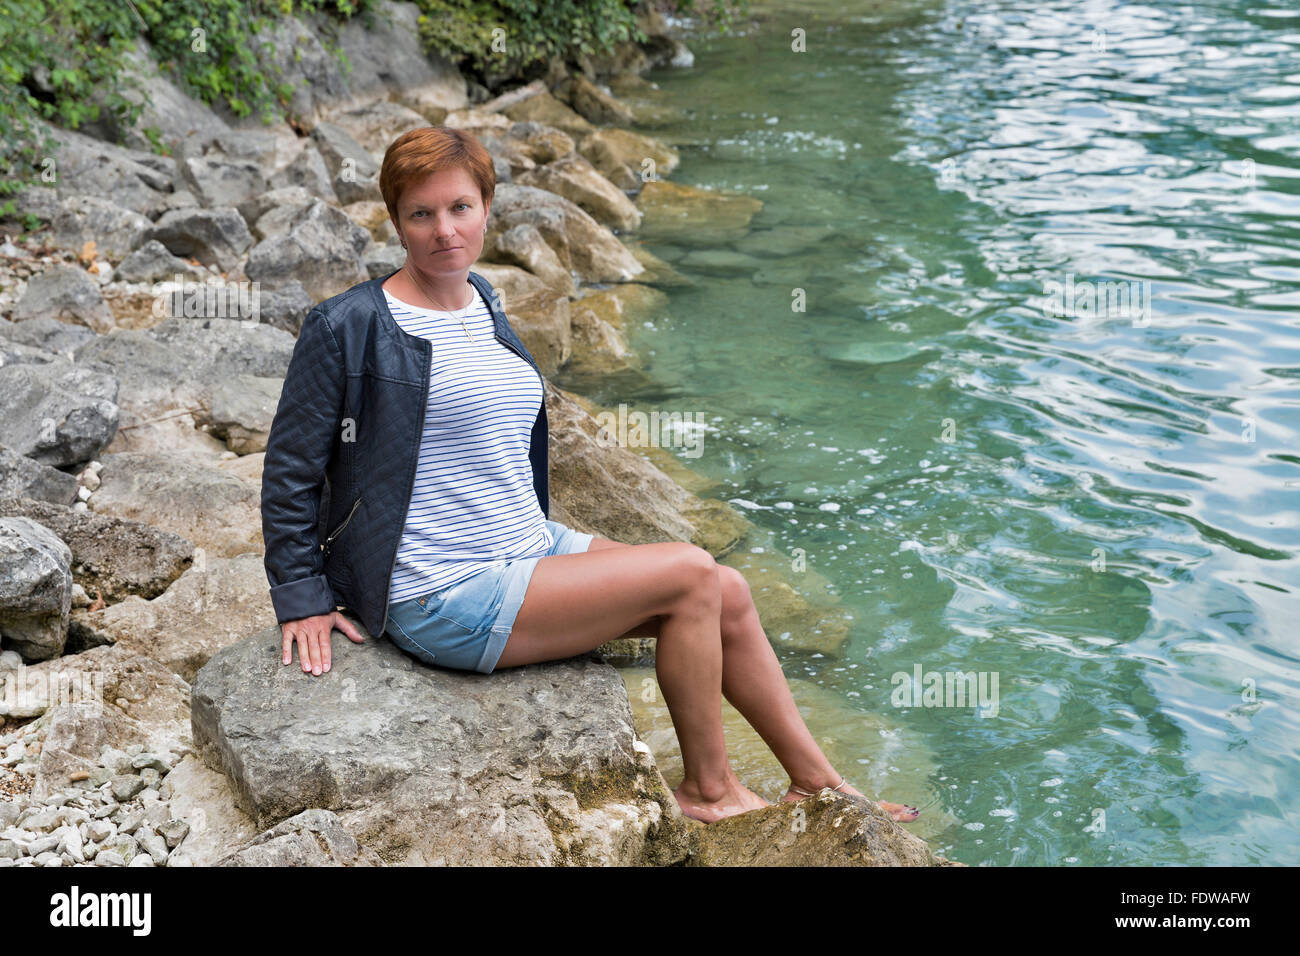 white middle aged red haired tanned woman in shorts and leather jacket sits barefoot on stones by the lake shore with clear tran Stock Photo